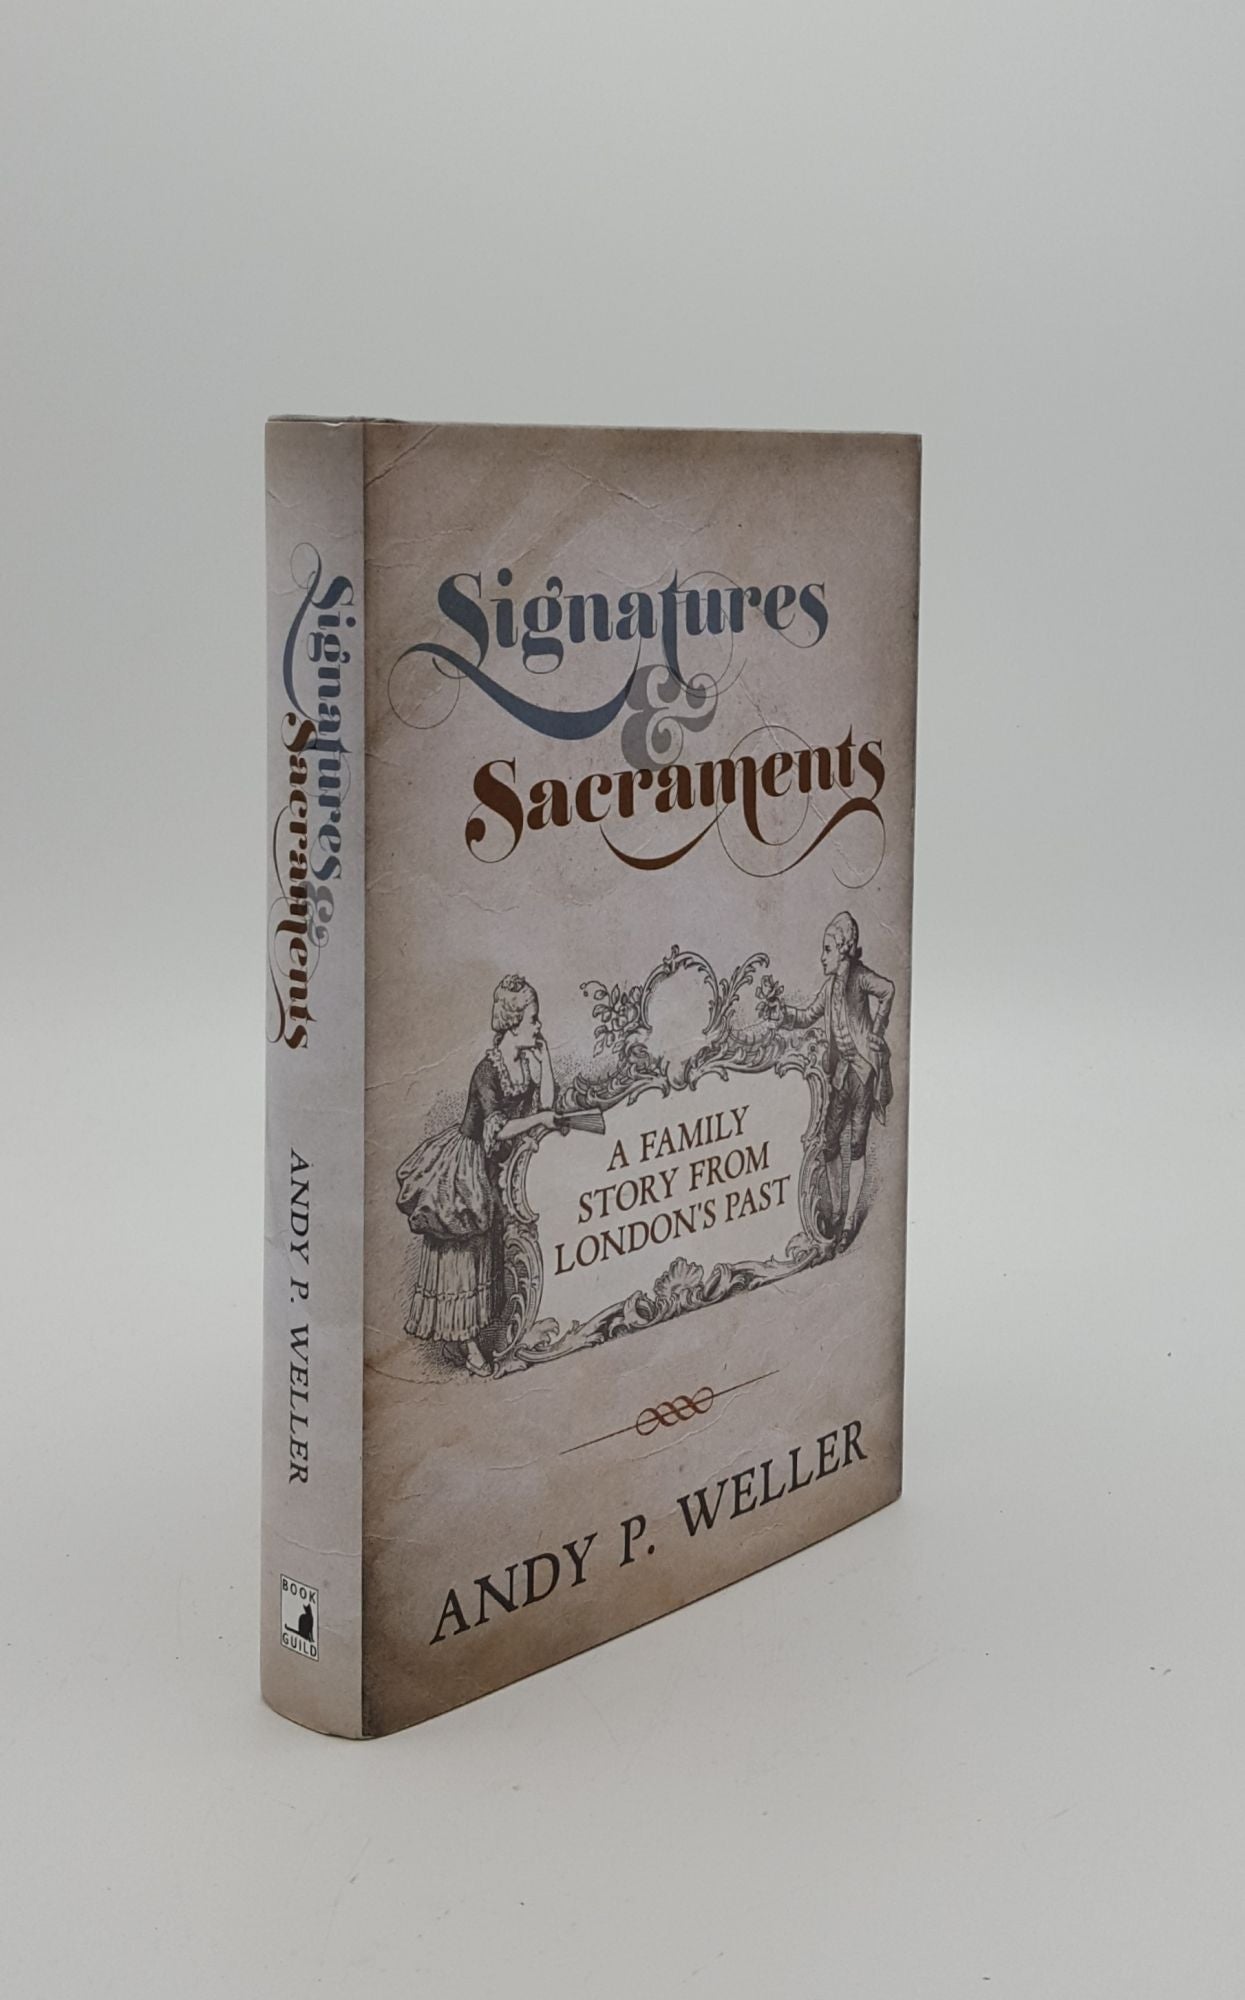 WELLER Andy - Signatures and Sacraments a Family Story from London's Past